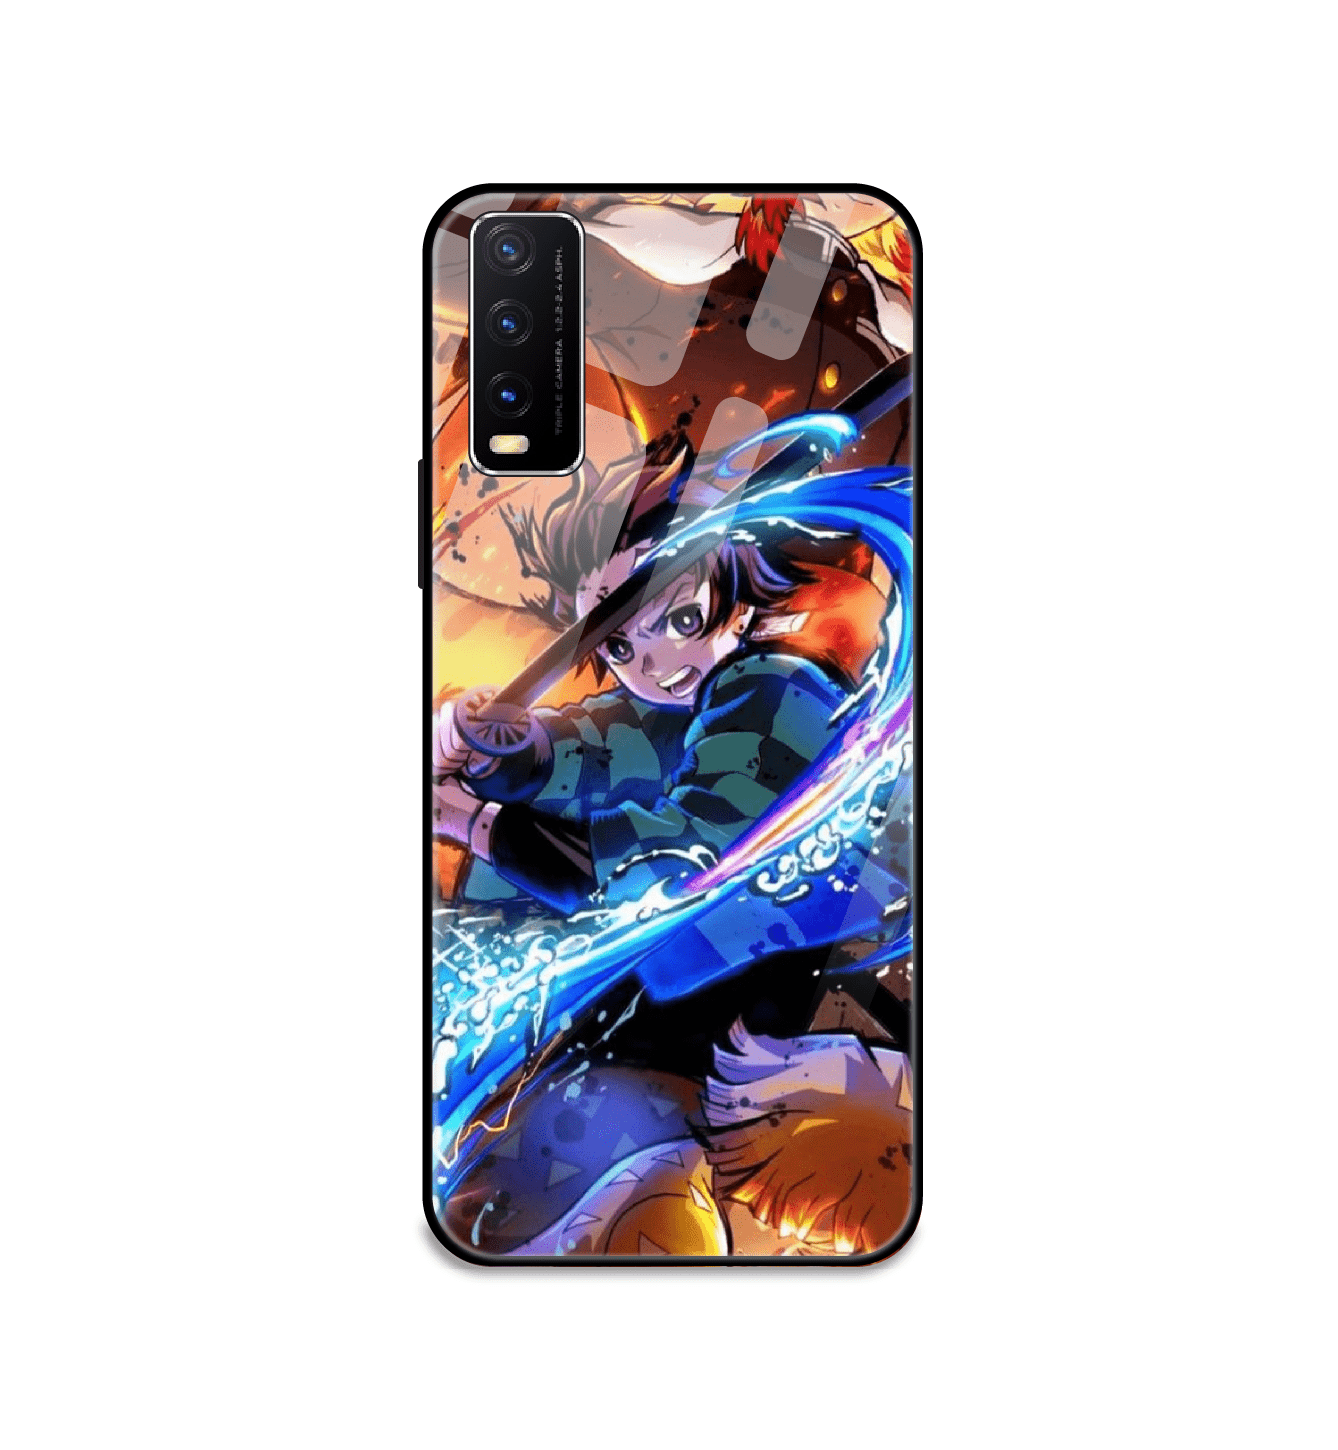 Samsung Galaxy S7 Anime Cases  Design By Humans